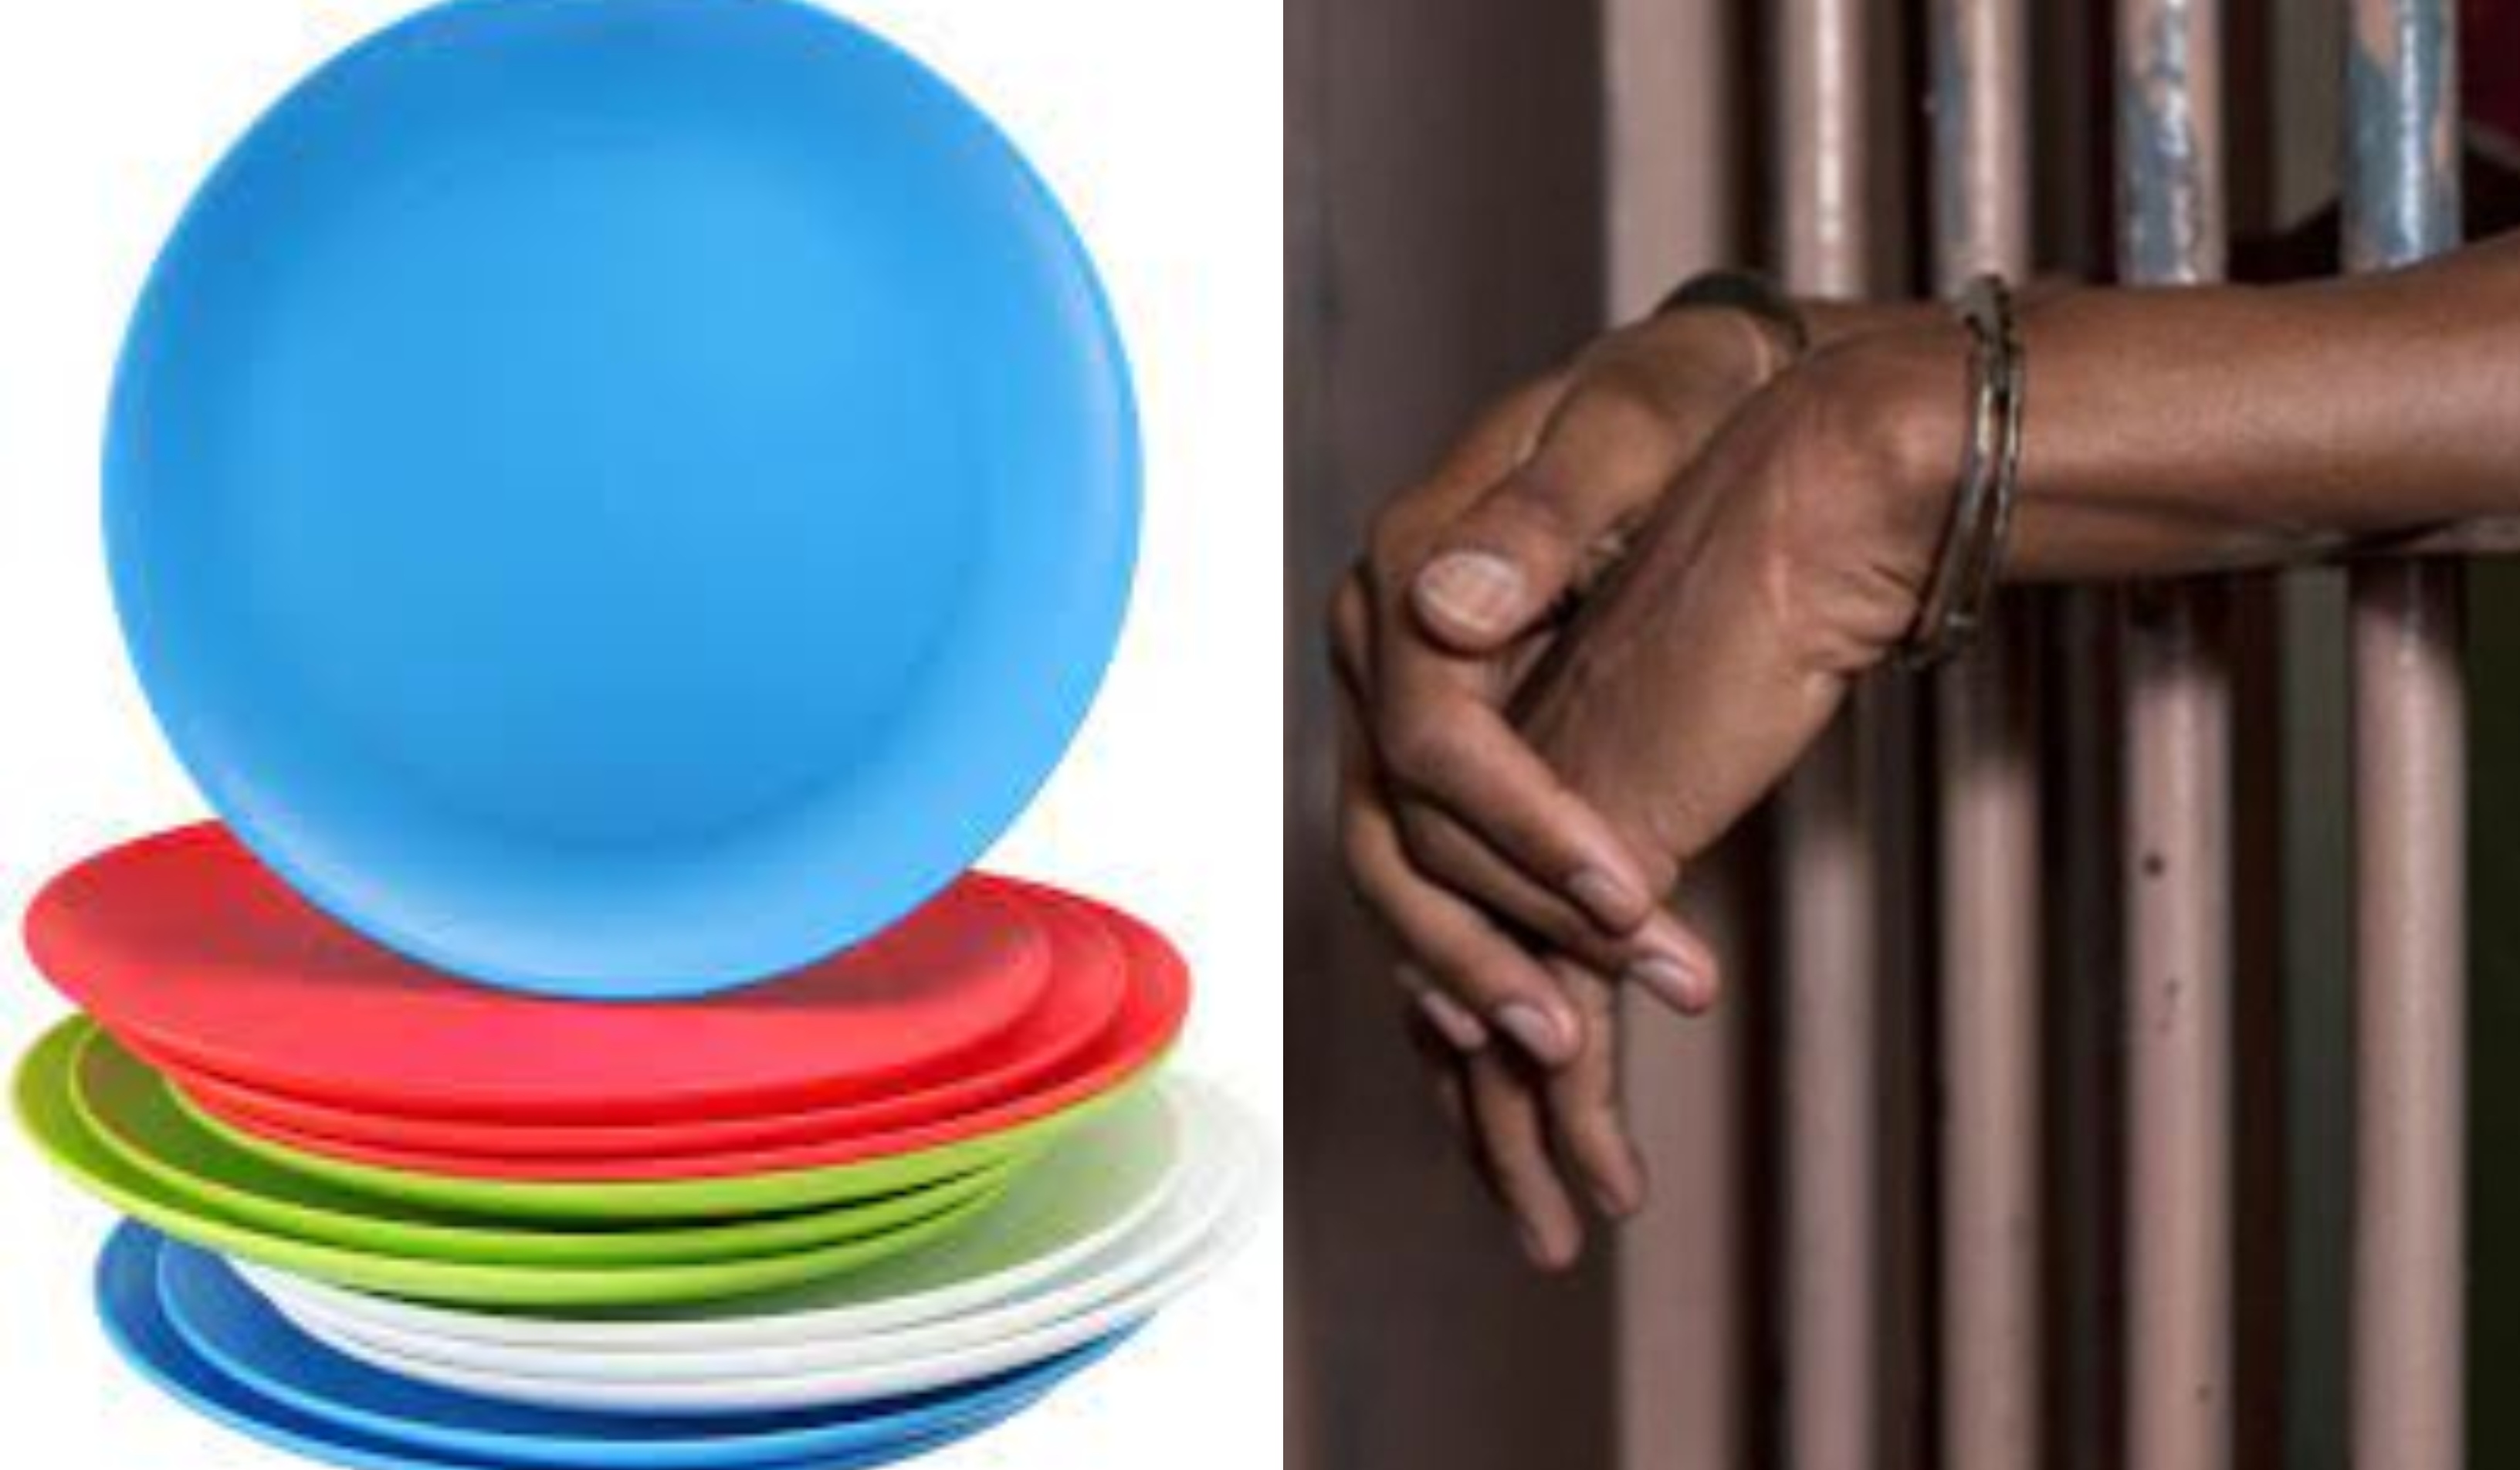 23-year-old man jailed 3 months for stealing mother's plates